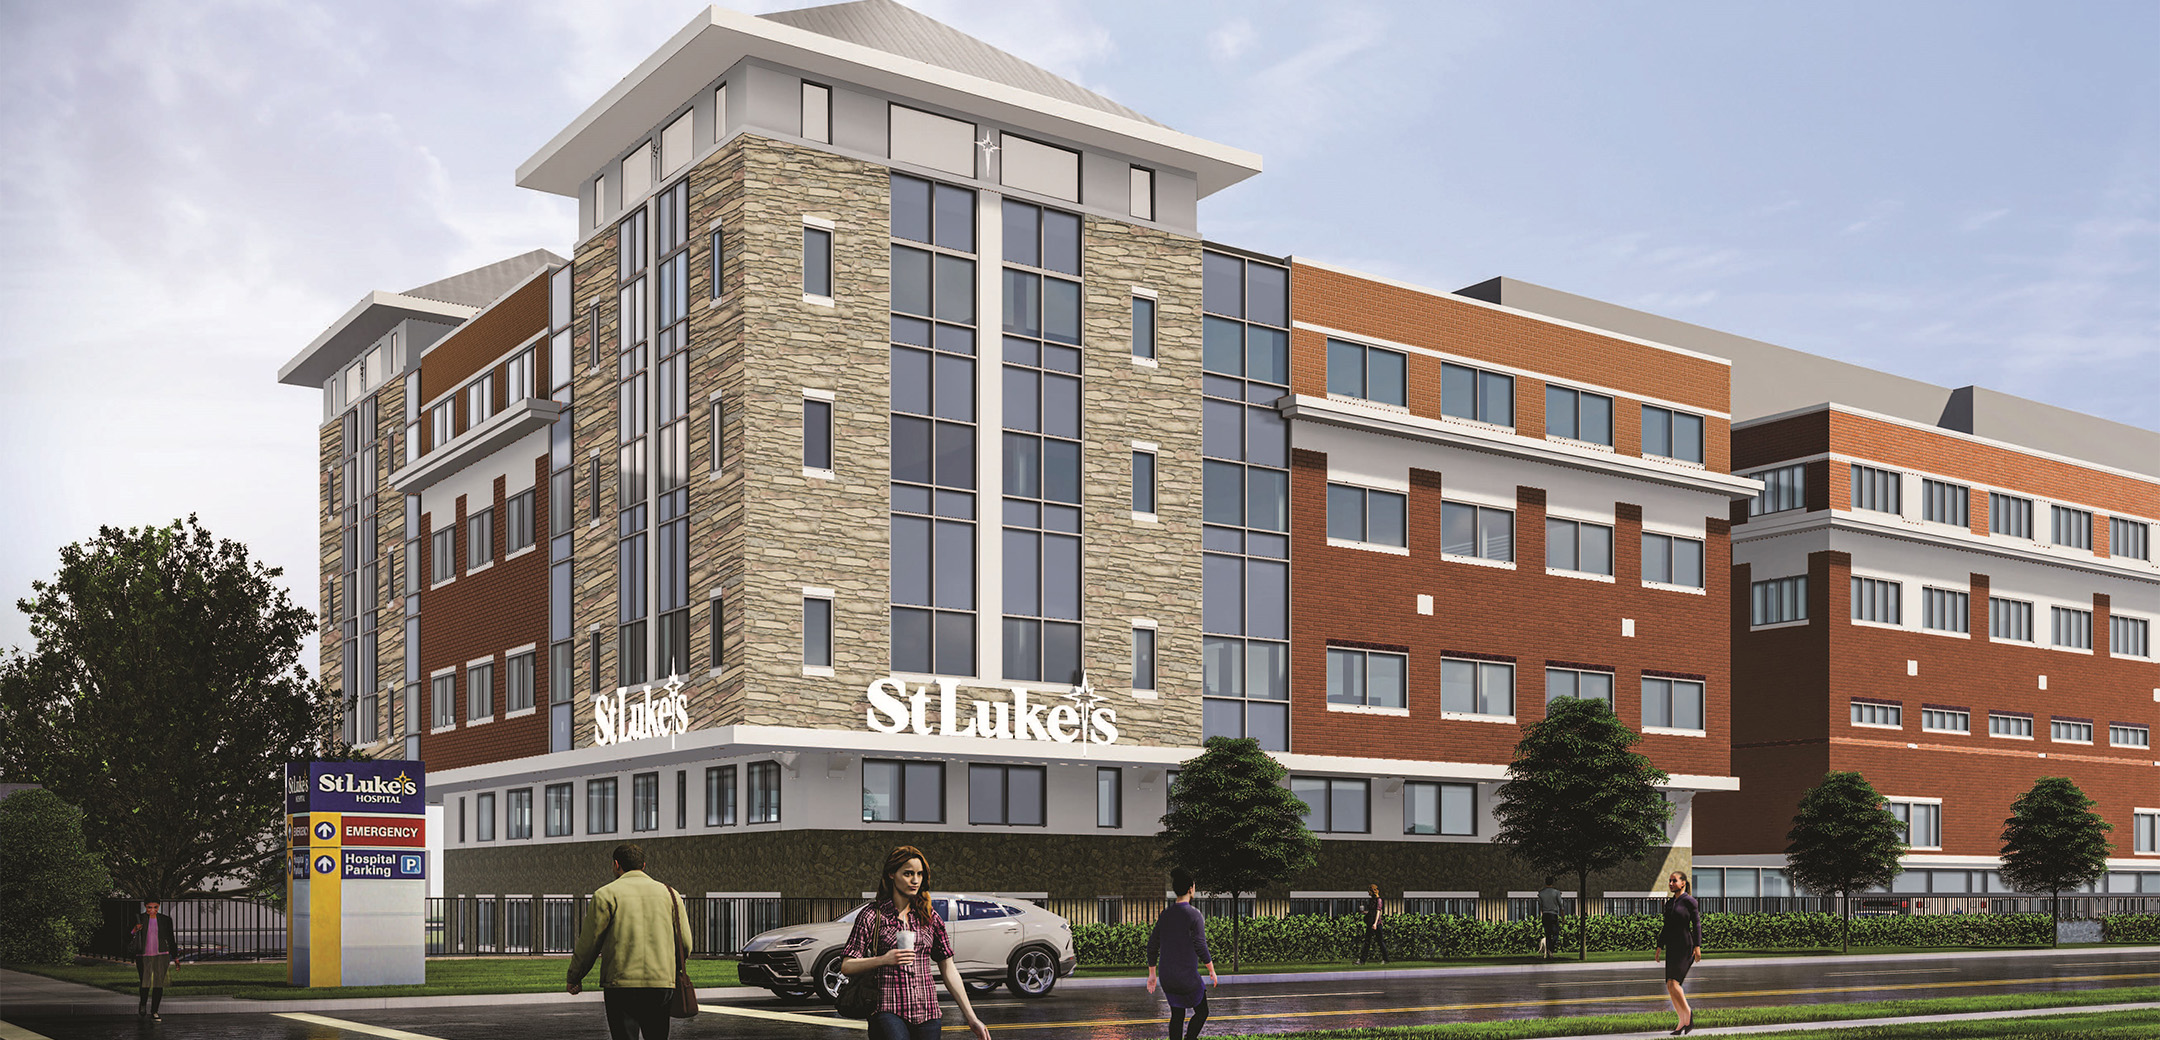 The rendering of the brick Mother's and Babies Tower for St. Luke's University Health Network